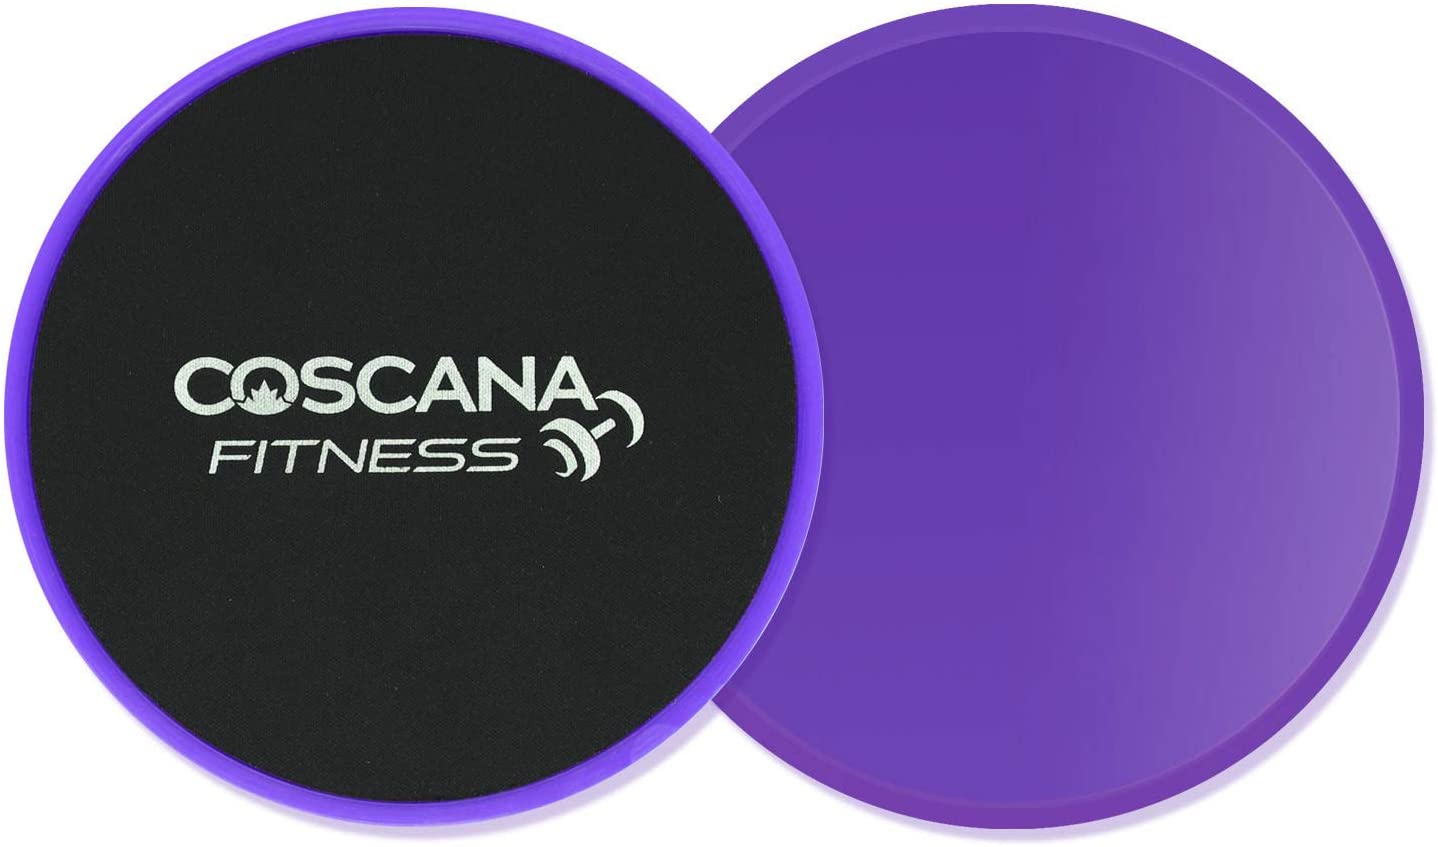 COSCANA Gliding Discs Core Sliders Use on Both Sides of The Carpet or Hardwood Floor Home Exercises to Strengthen Core Dual Sided Fitness Equipment Abdominal Perfect Home Workout